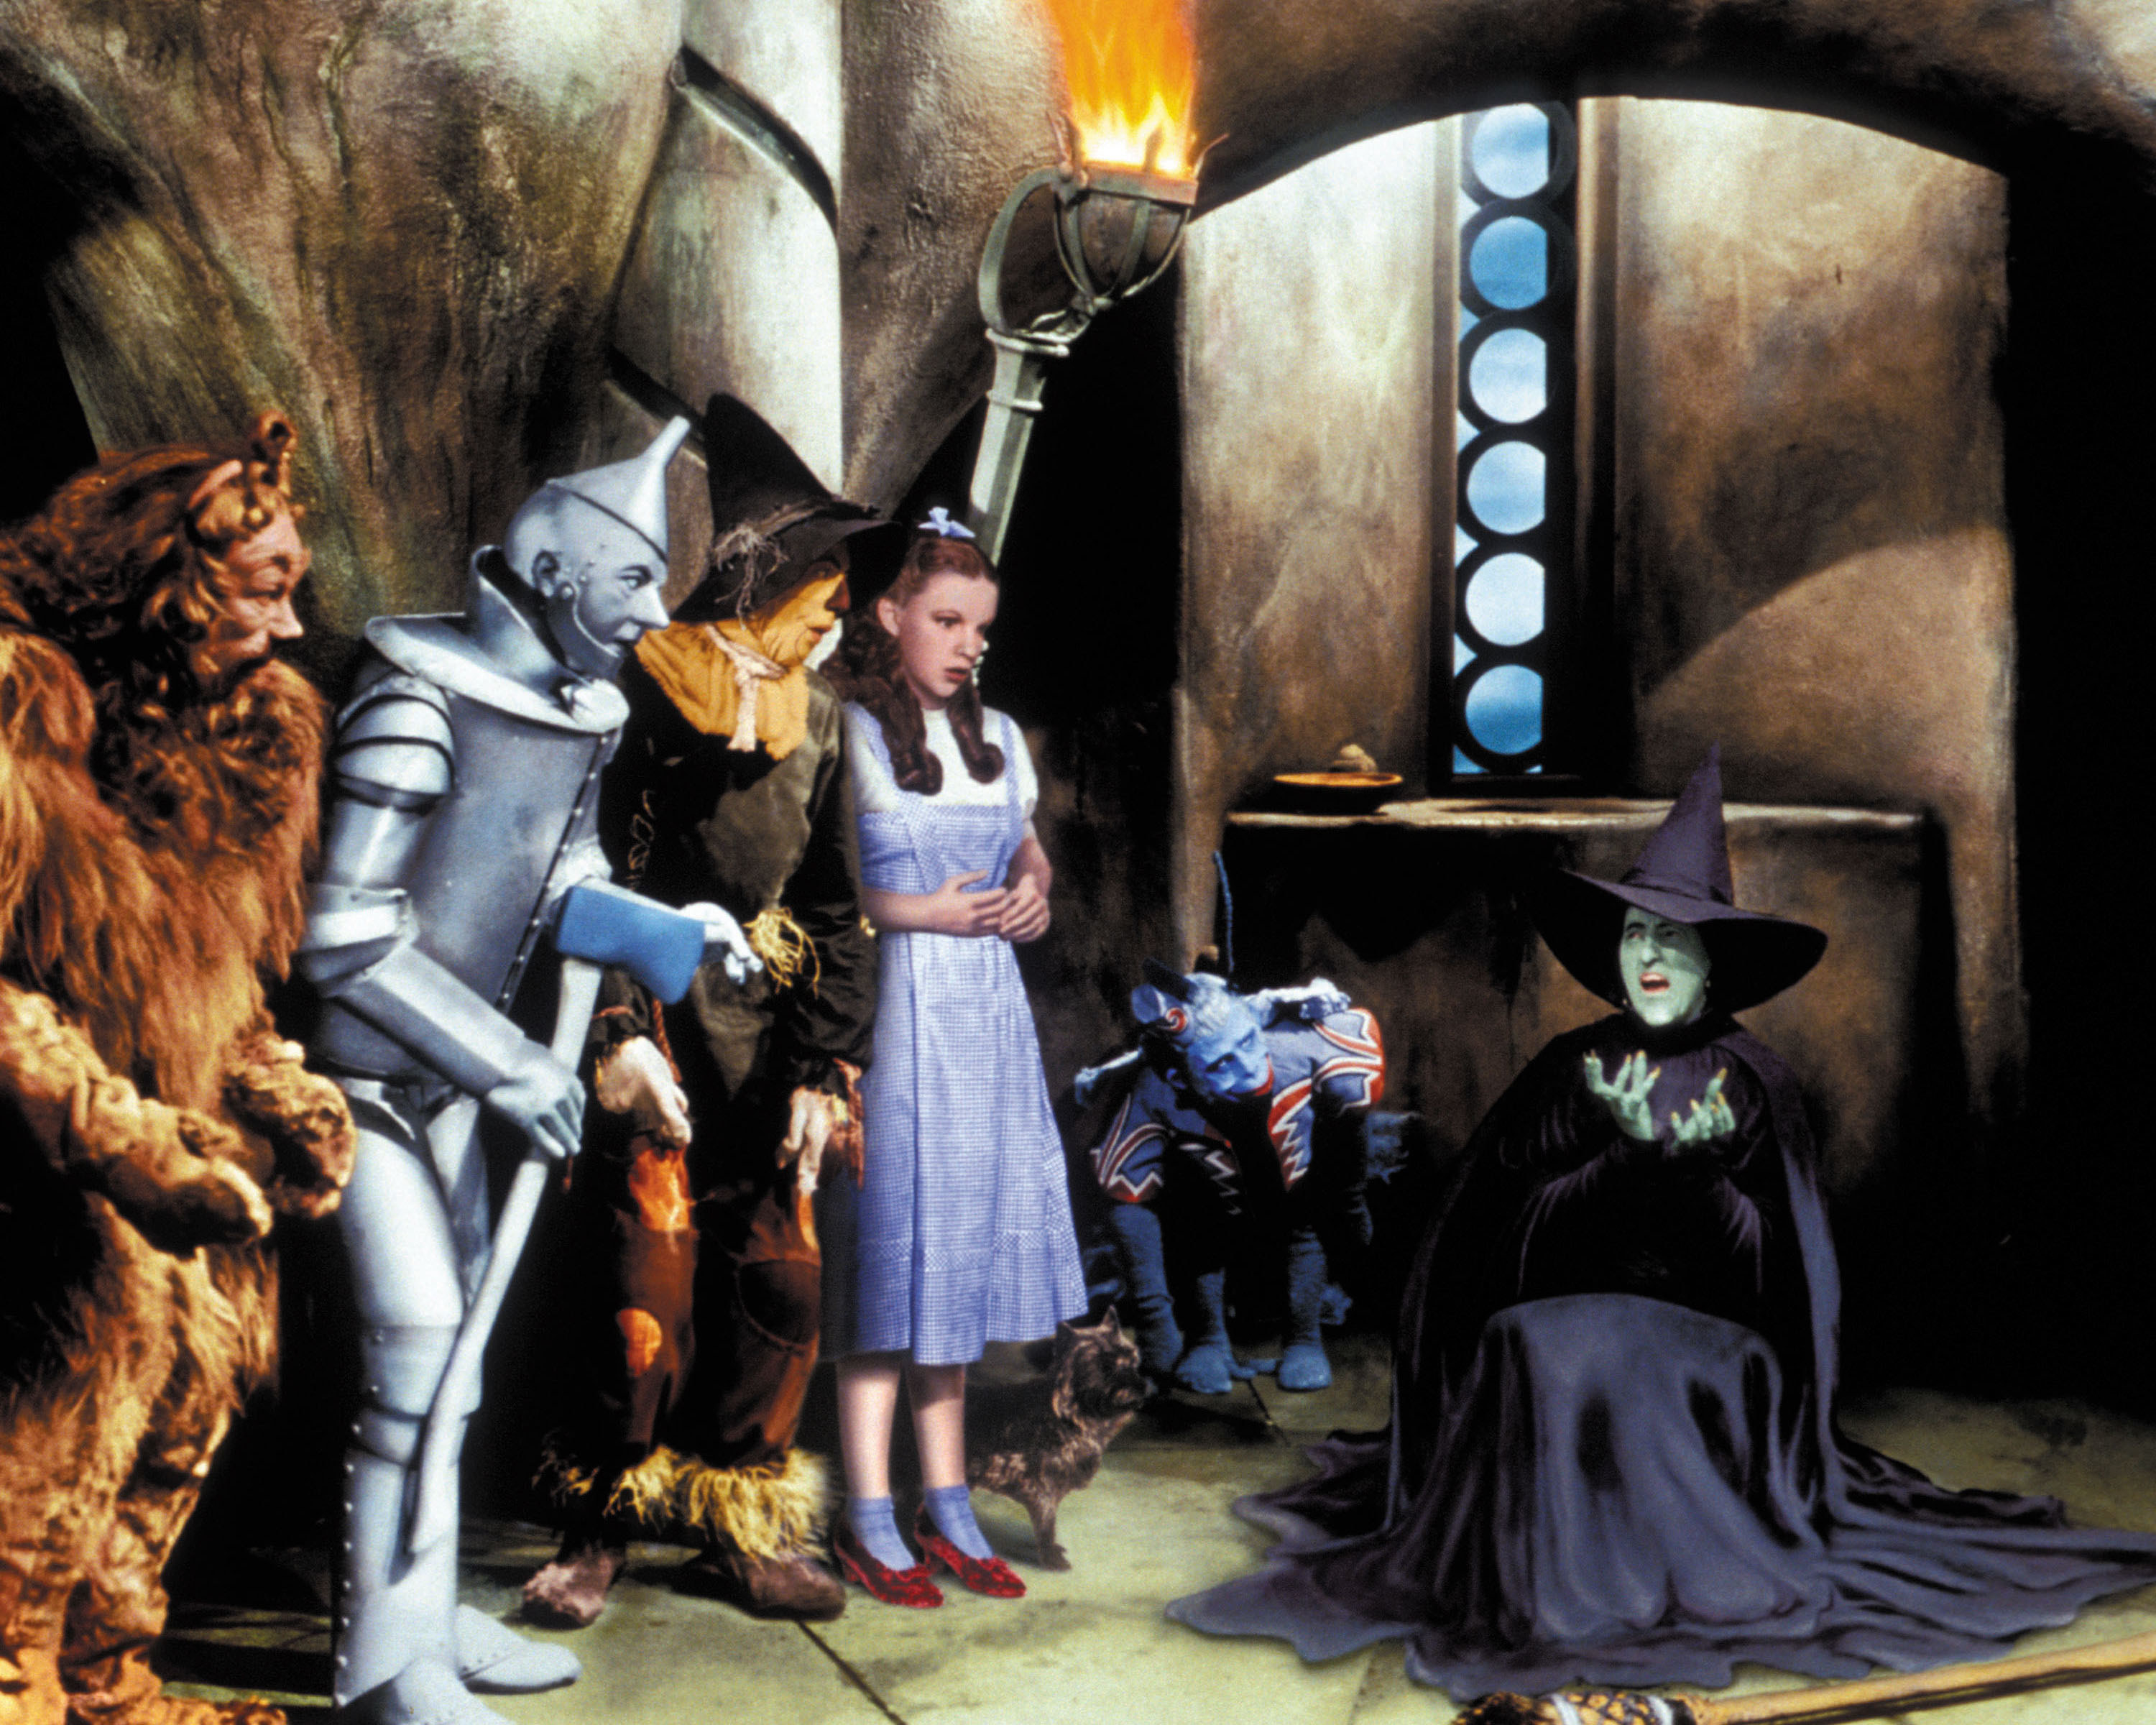 Jack Haley, Ray Bolger, Judy Garland, and Margaret Hamilton, all in costume, in a publicity still from the film, &#x27;The Wizard of Oz&#x27;, 1939